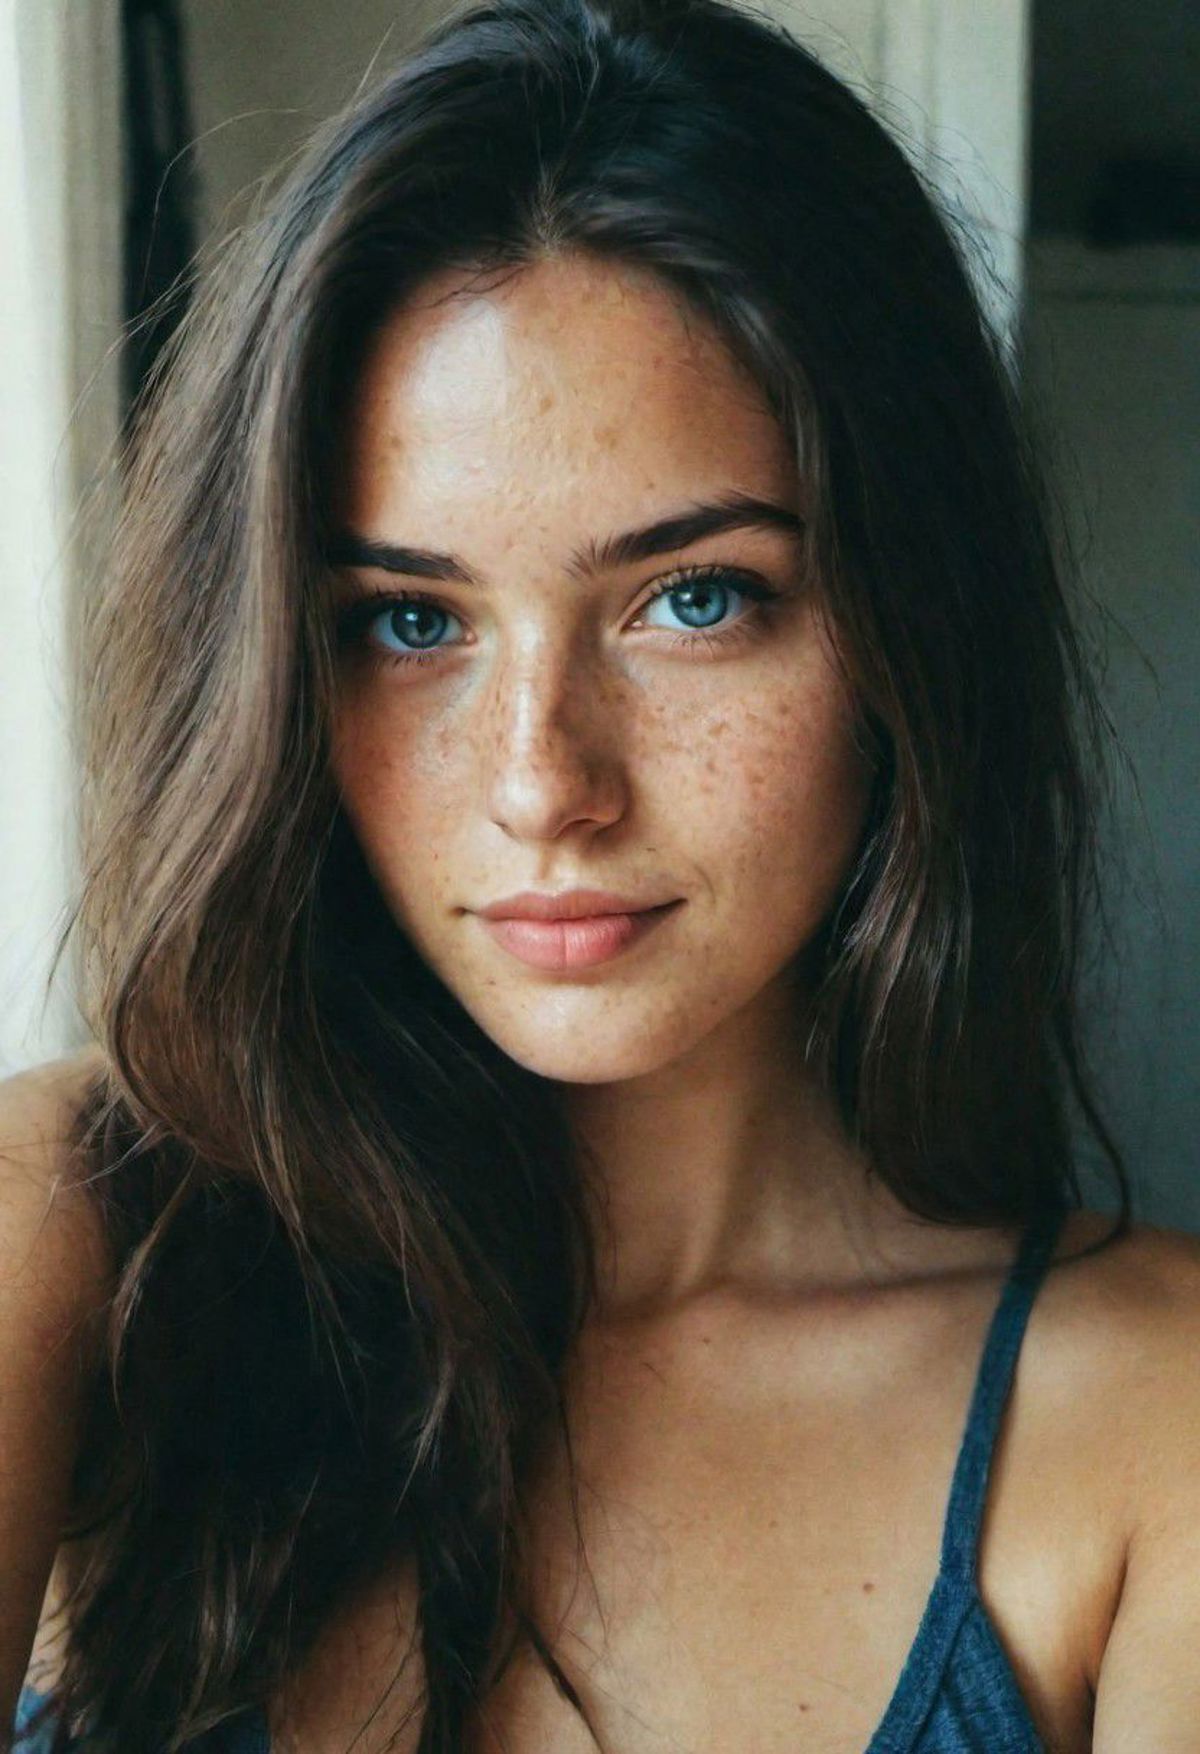 A Brown-Haired Woman with Freckles Posing for a Picture.